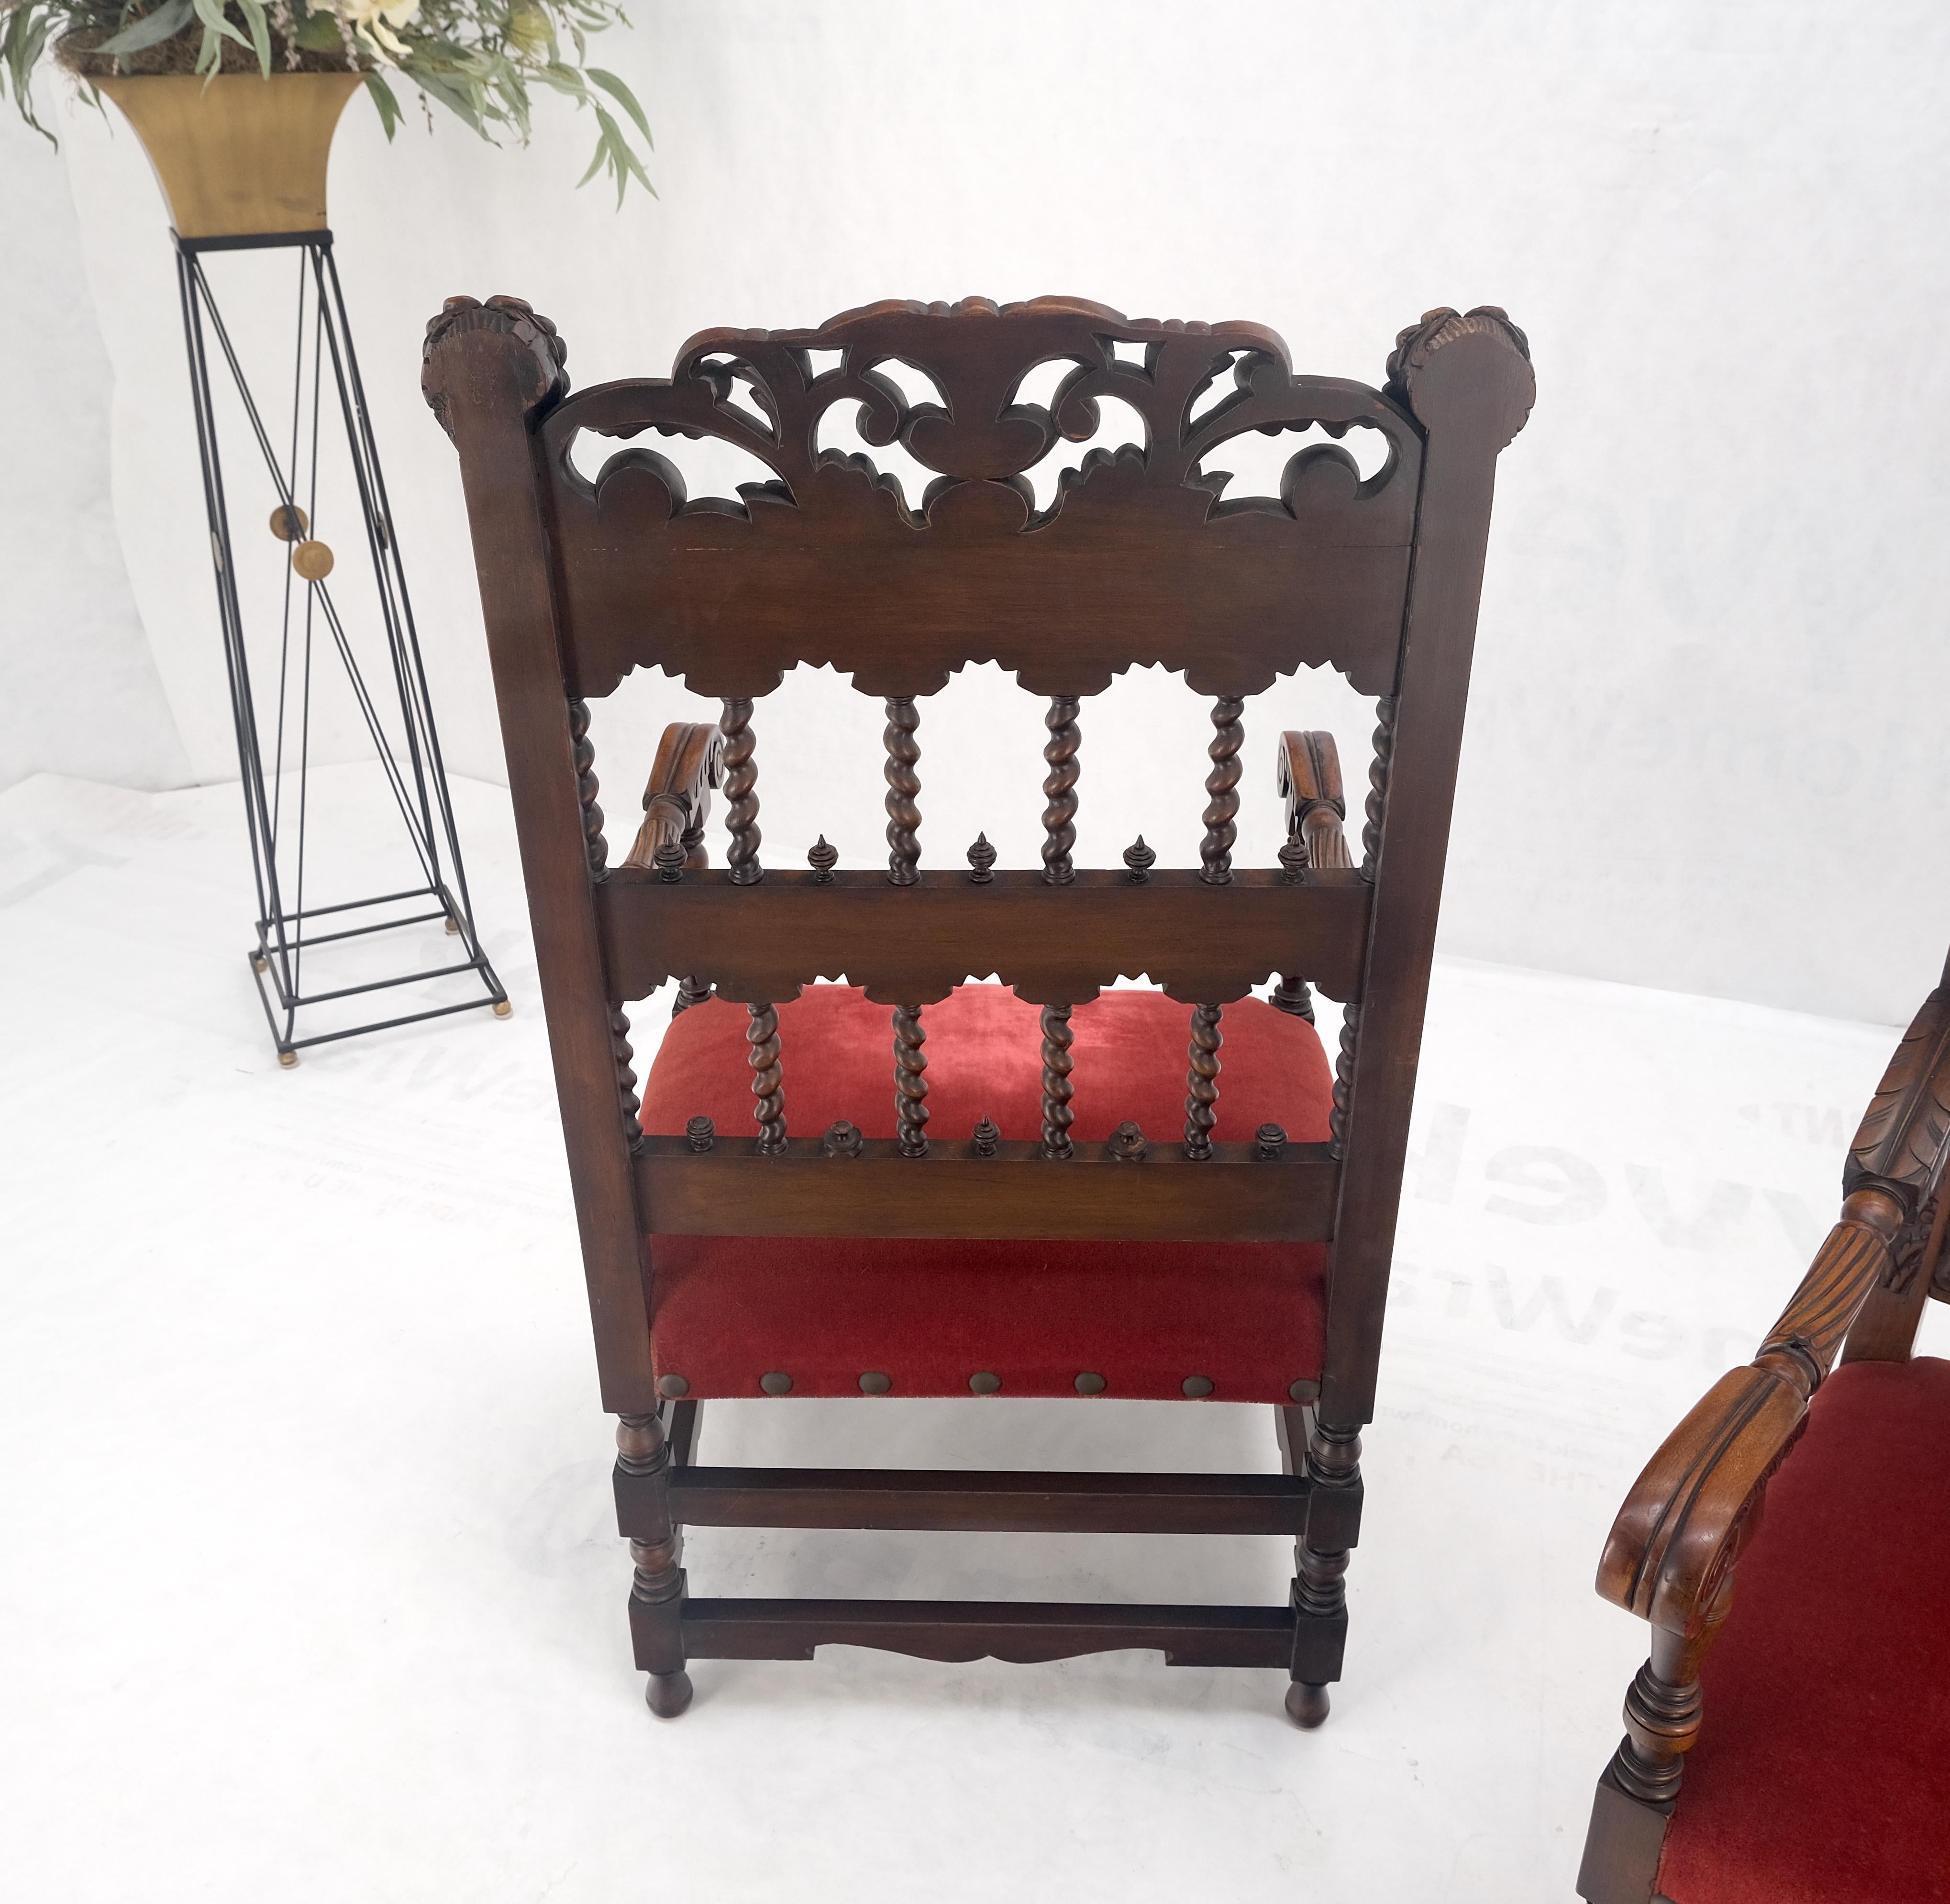 Fine Carved North Winds Faces Heavy Oak Arm Chairs Twisted Spindles c1900s MINT In Excellent Condition For Sale In Rockaway, NJ